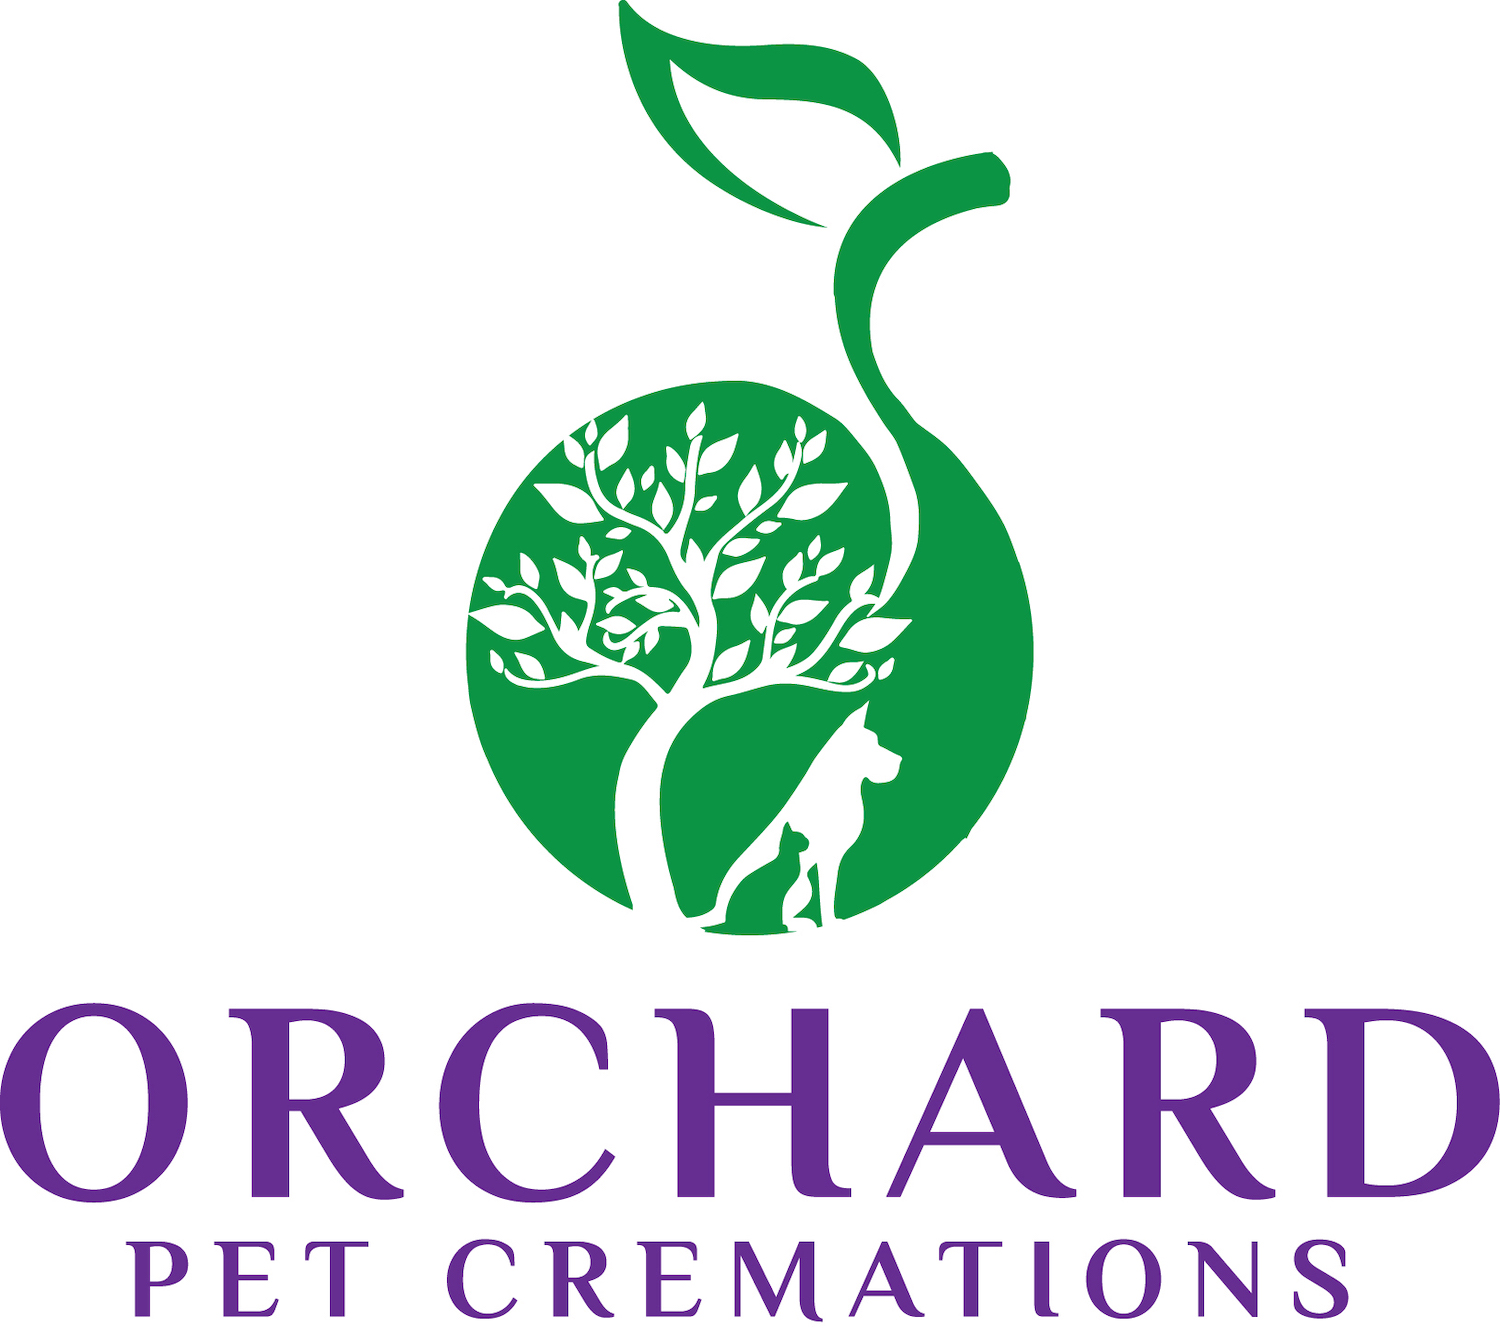 Orchard Pet Cremations